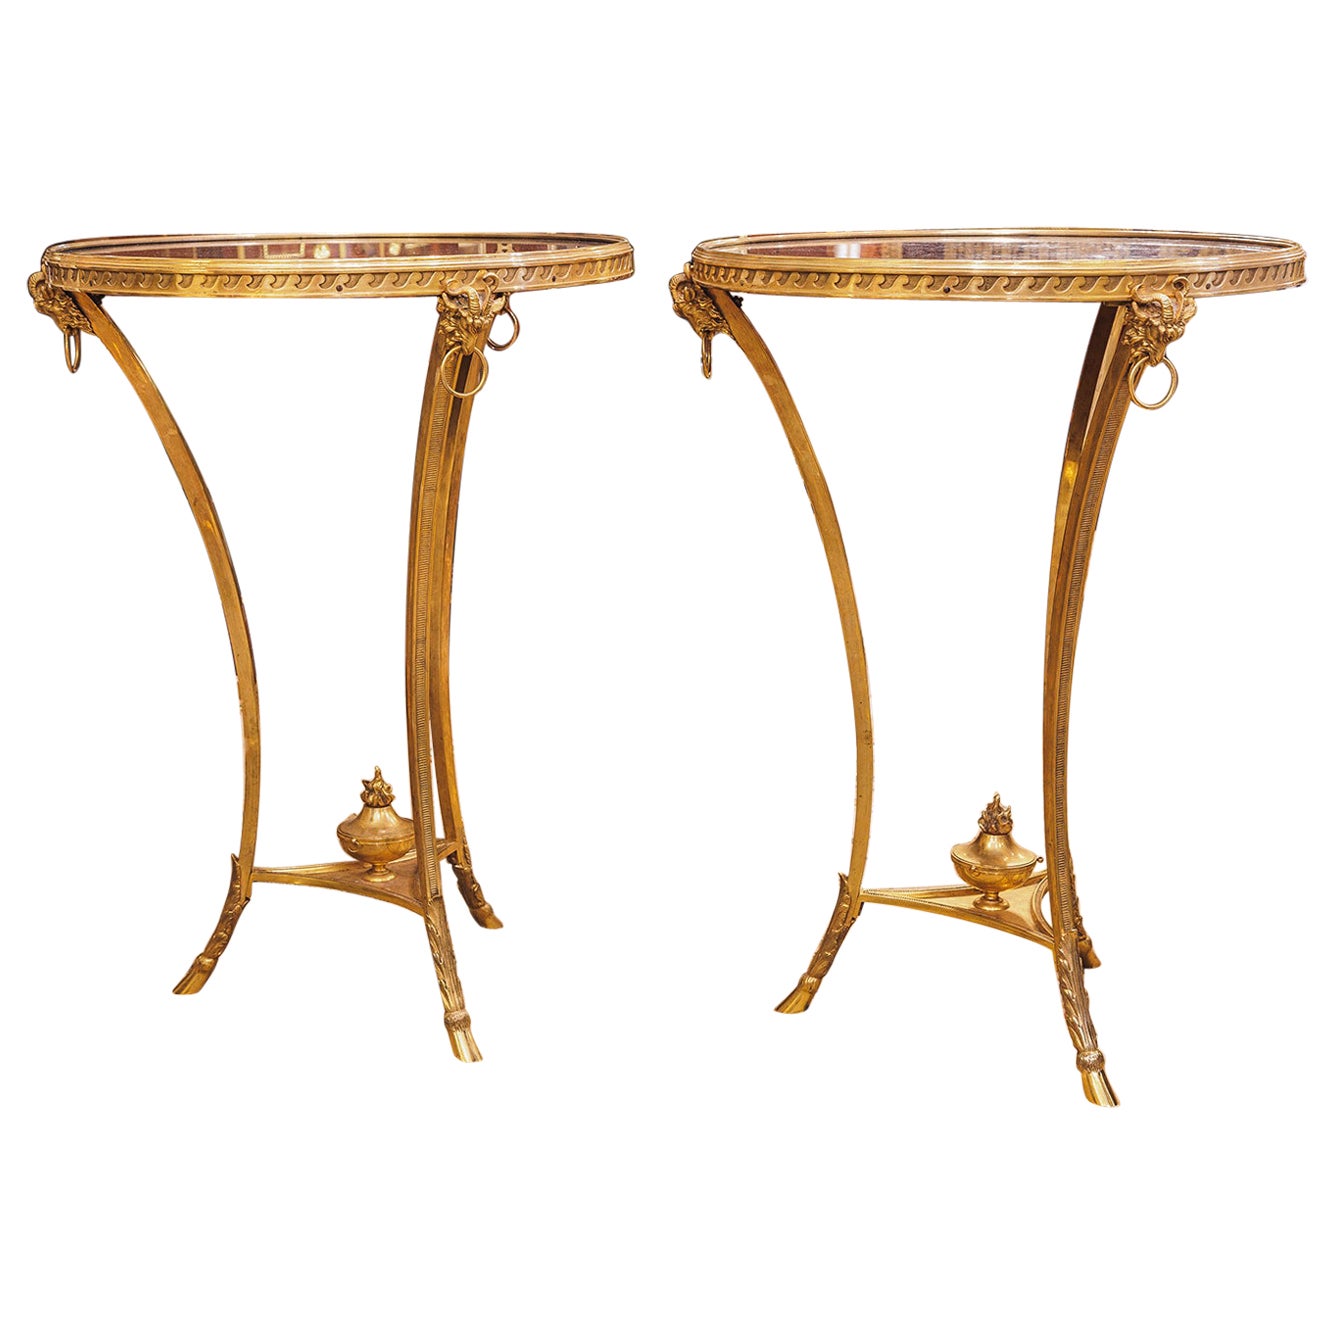 A very fine pair of 19th c French louis XVI marble top and gilt bronze gueridons